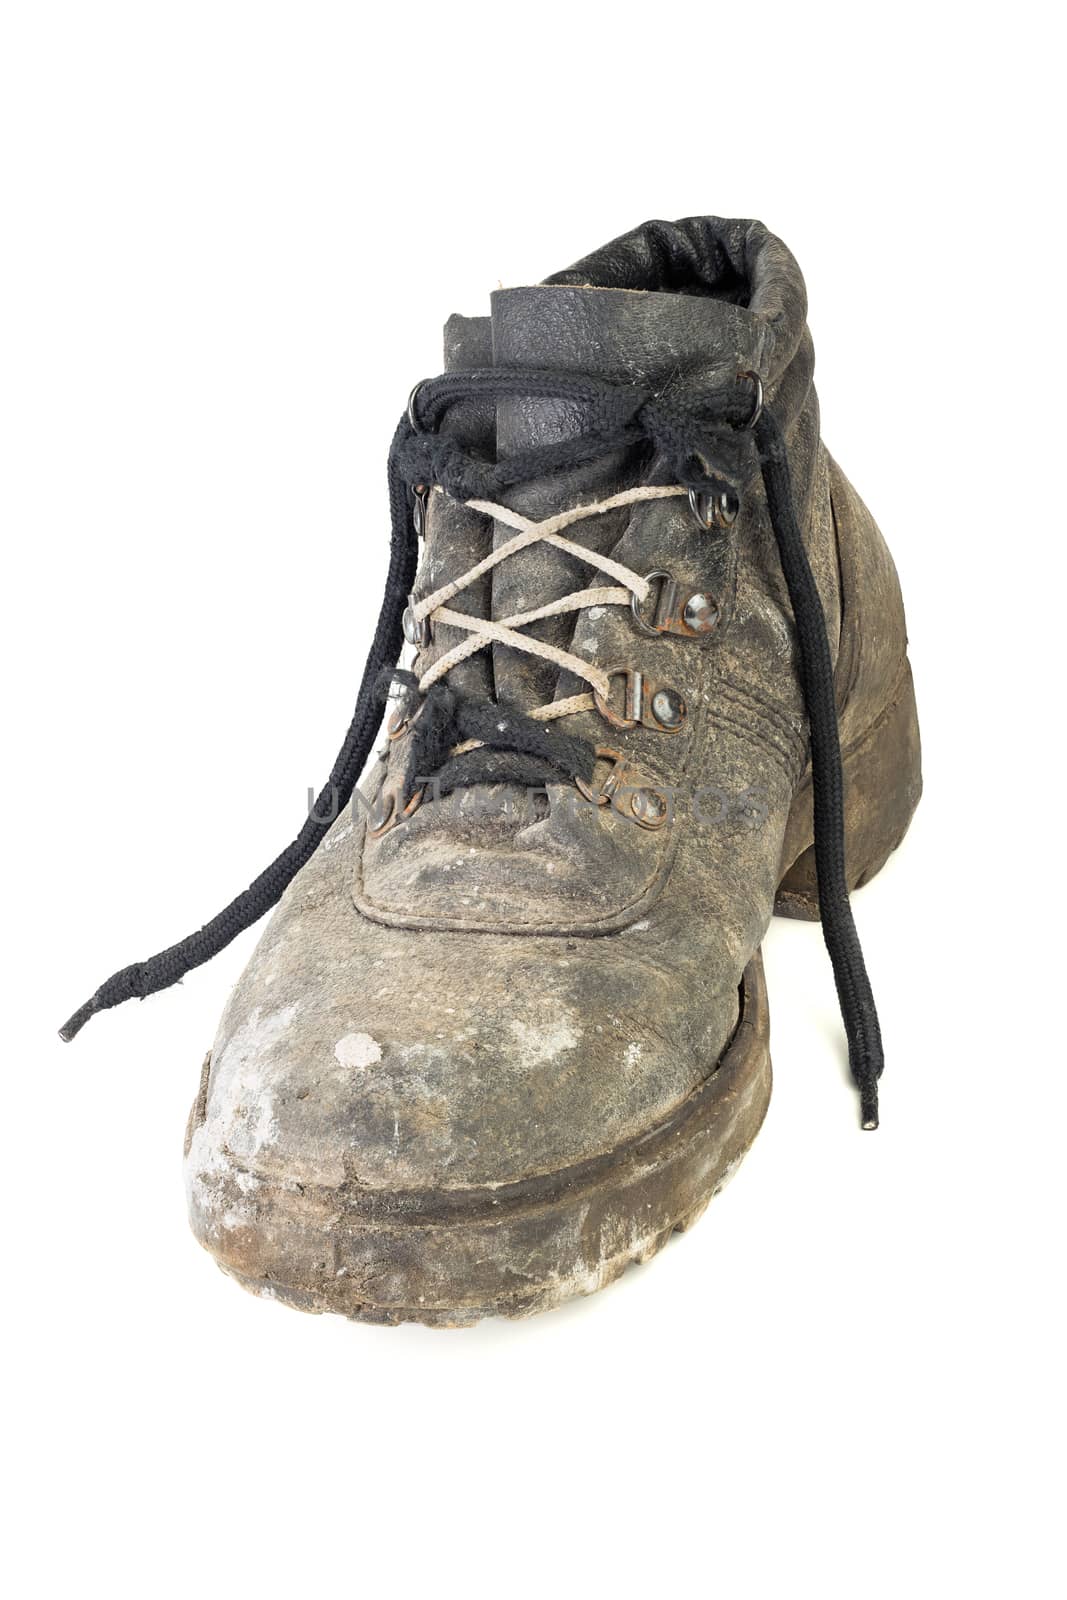 Right one dirty worn-out old work boot, isolated on white background with shadow.